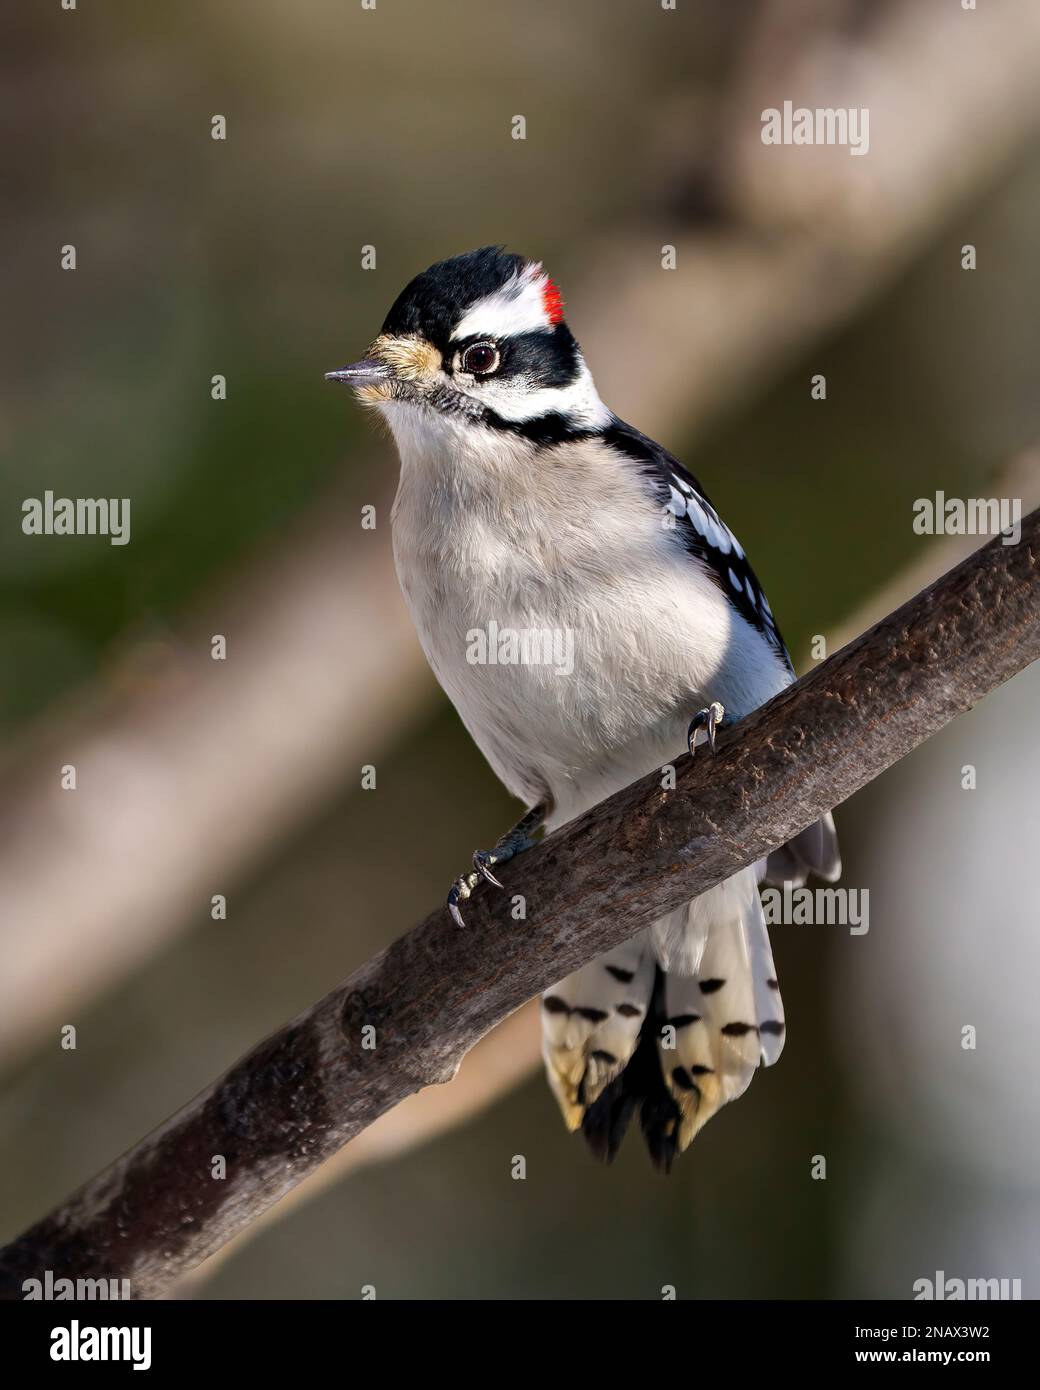 Woodpecker male front view and perched on a tree branch with a blur forest background in its environment and habitat. Stock Photo